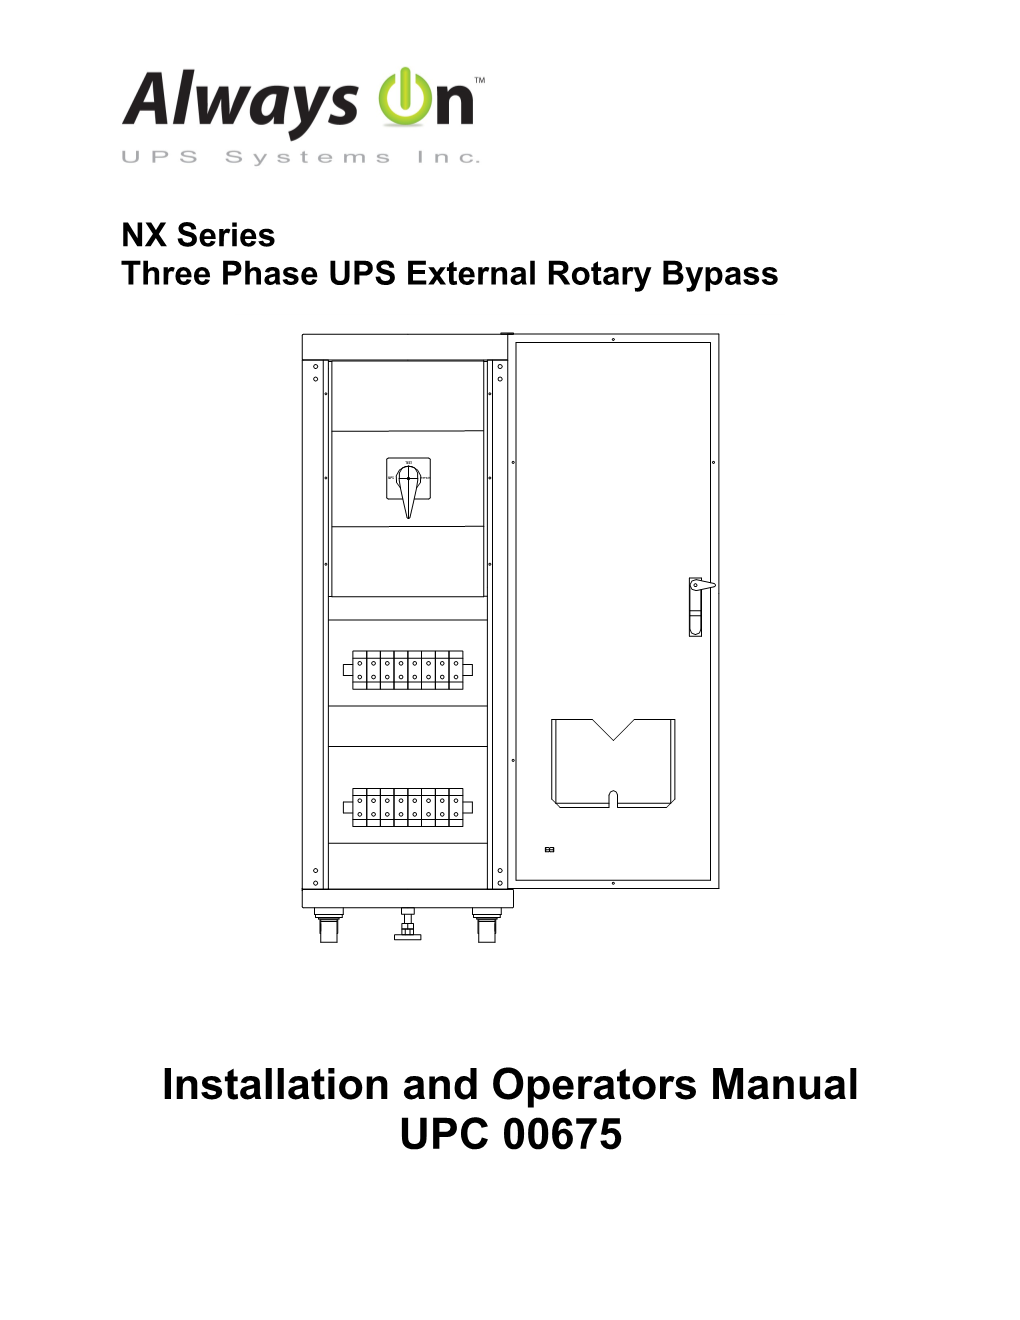 NX Series 3 Phase UPS System